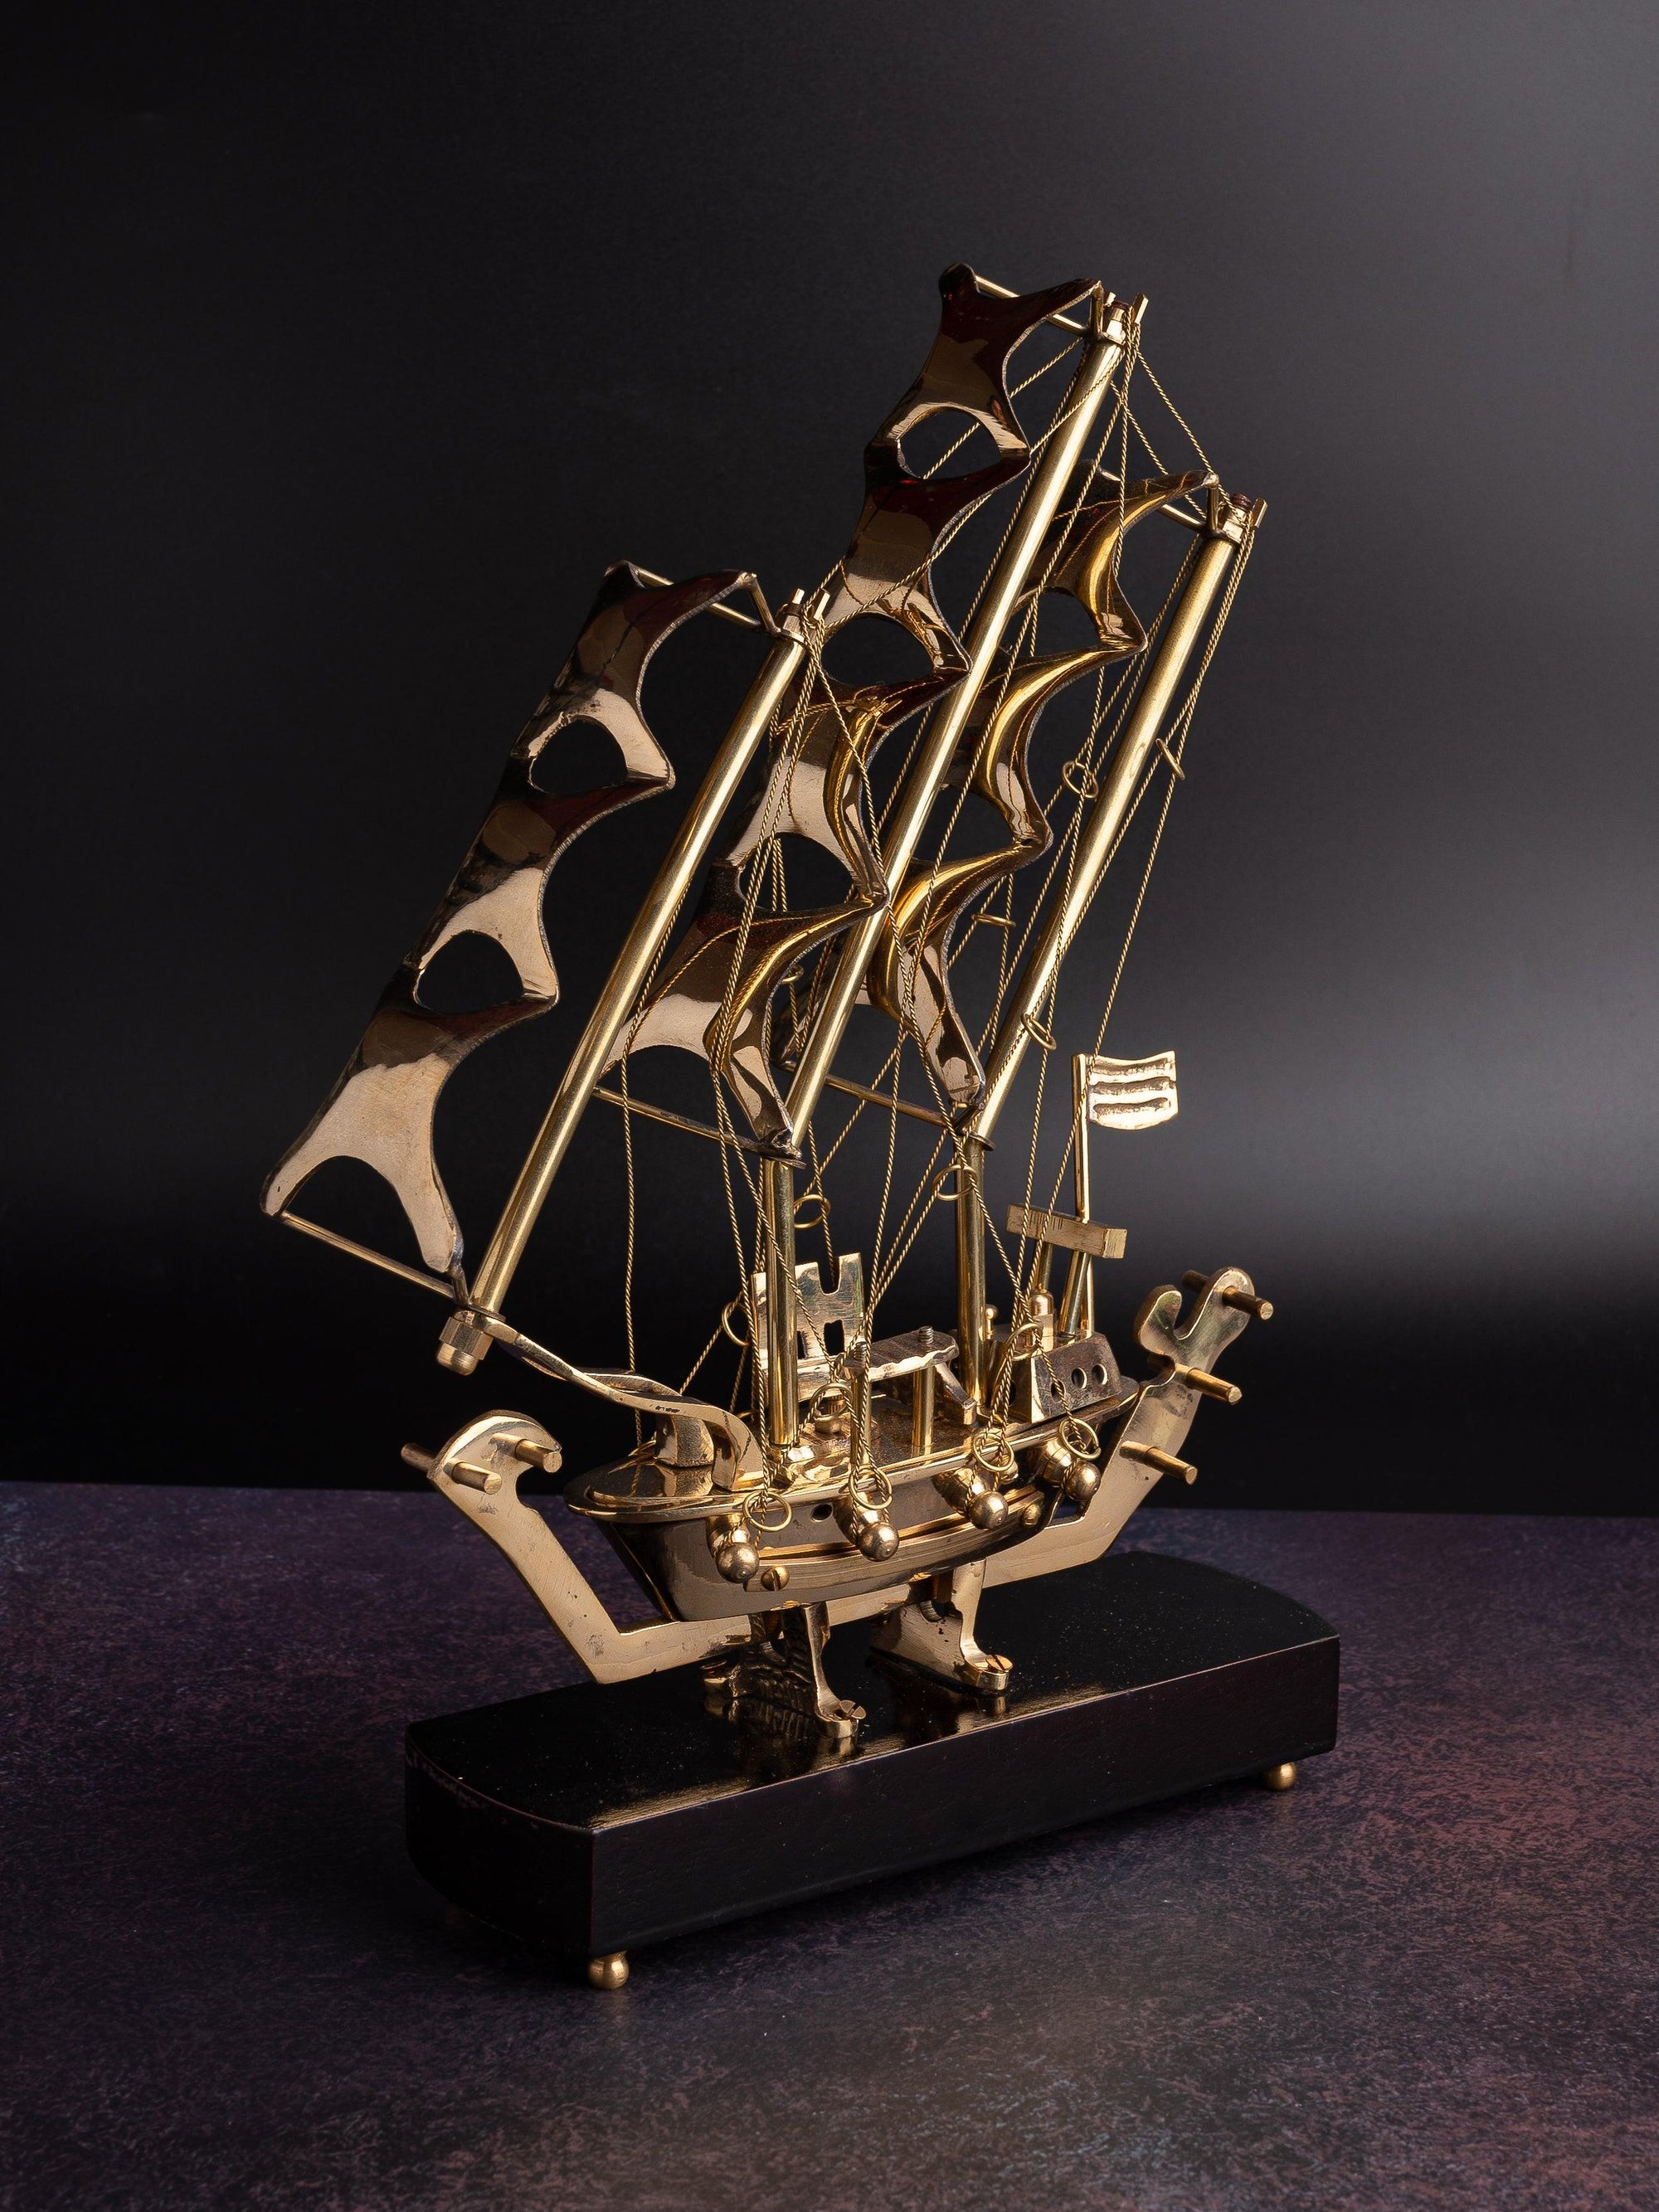 Brass Sailing Pirate Ship on a Wooden Base, Decorative showpiece - The Heritage Artifacts